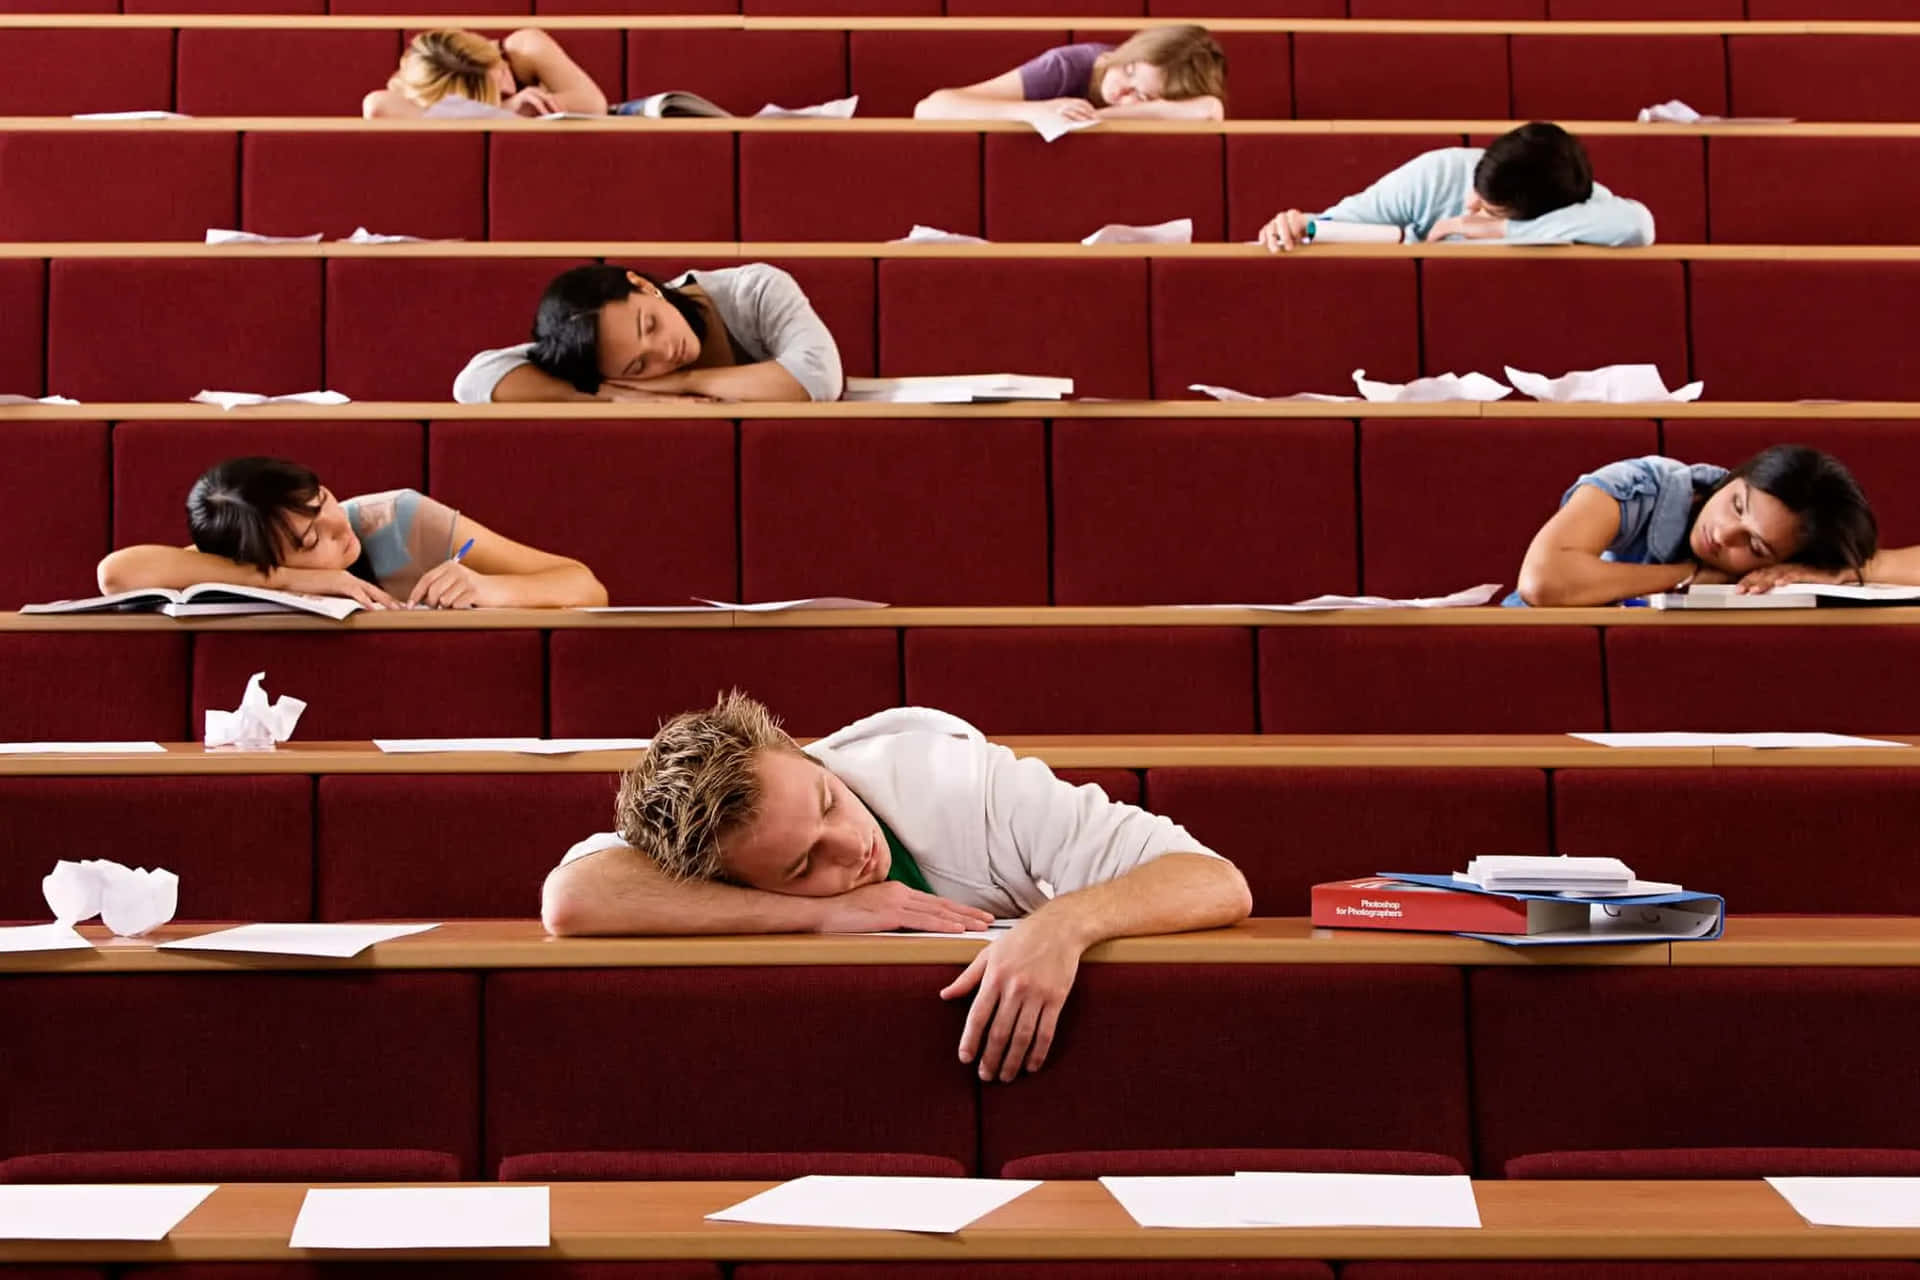 A Group Of People Sleeping In A Lecture Hall